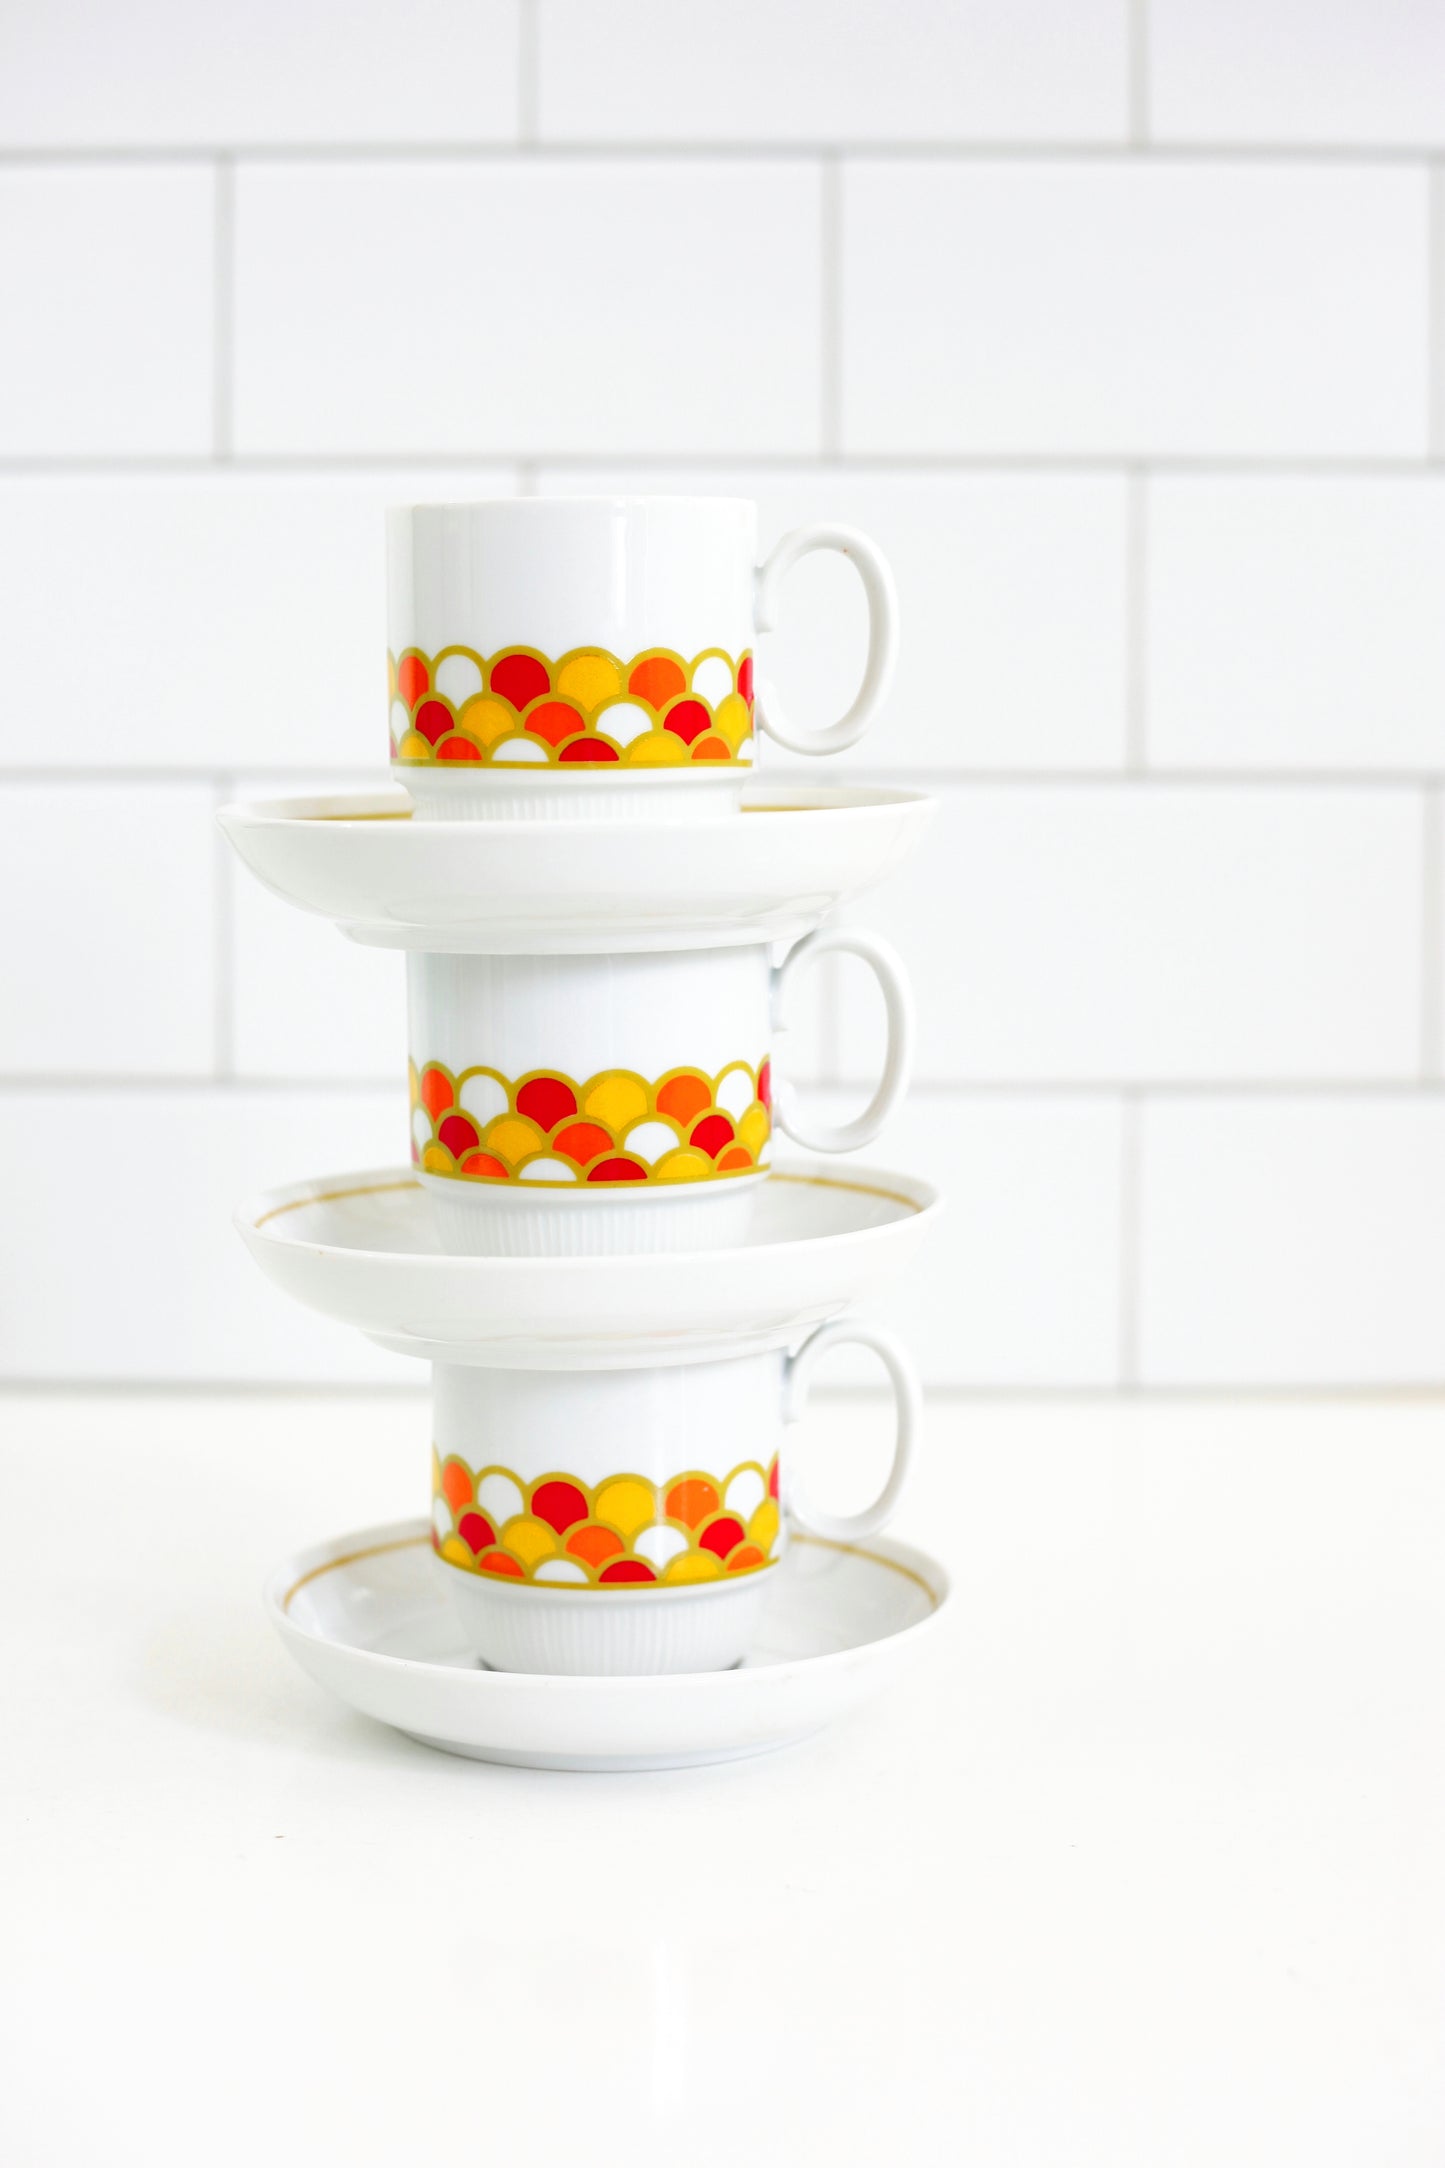 SOLD - Mid Century Georges Briard 'Carousel' Cup & Saucer Set